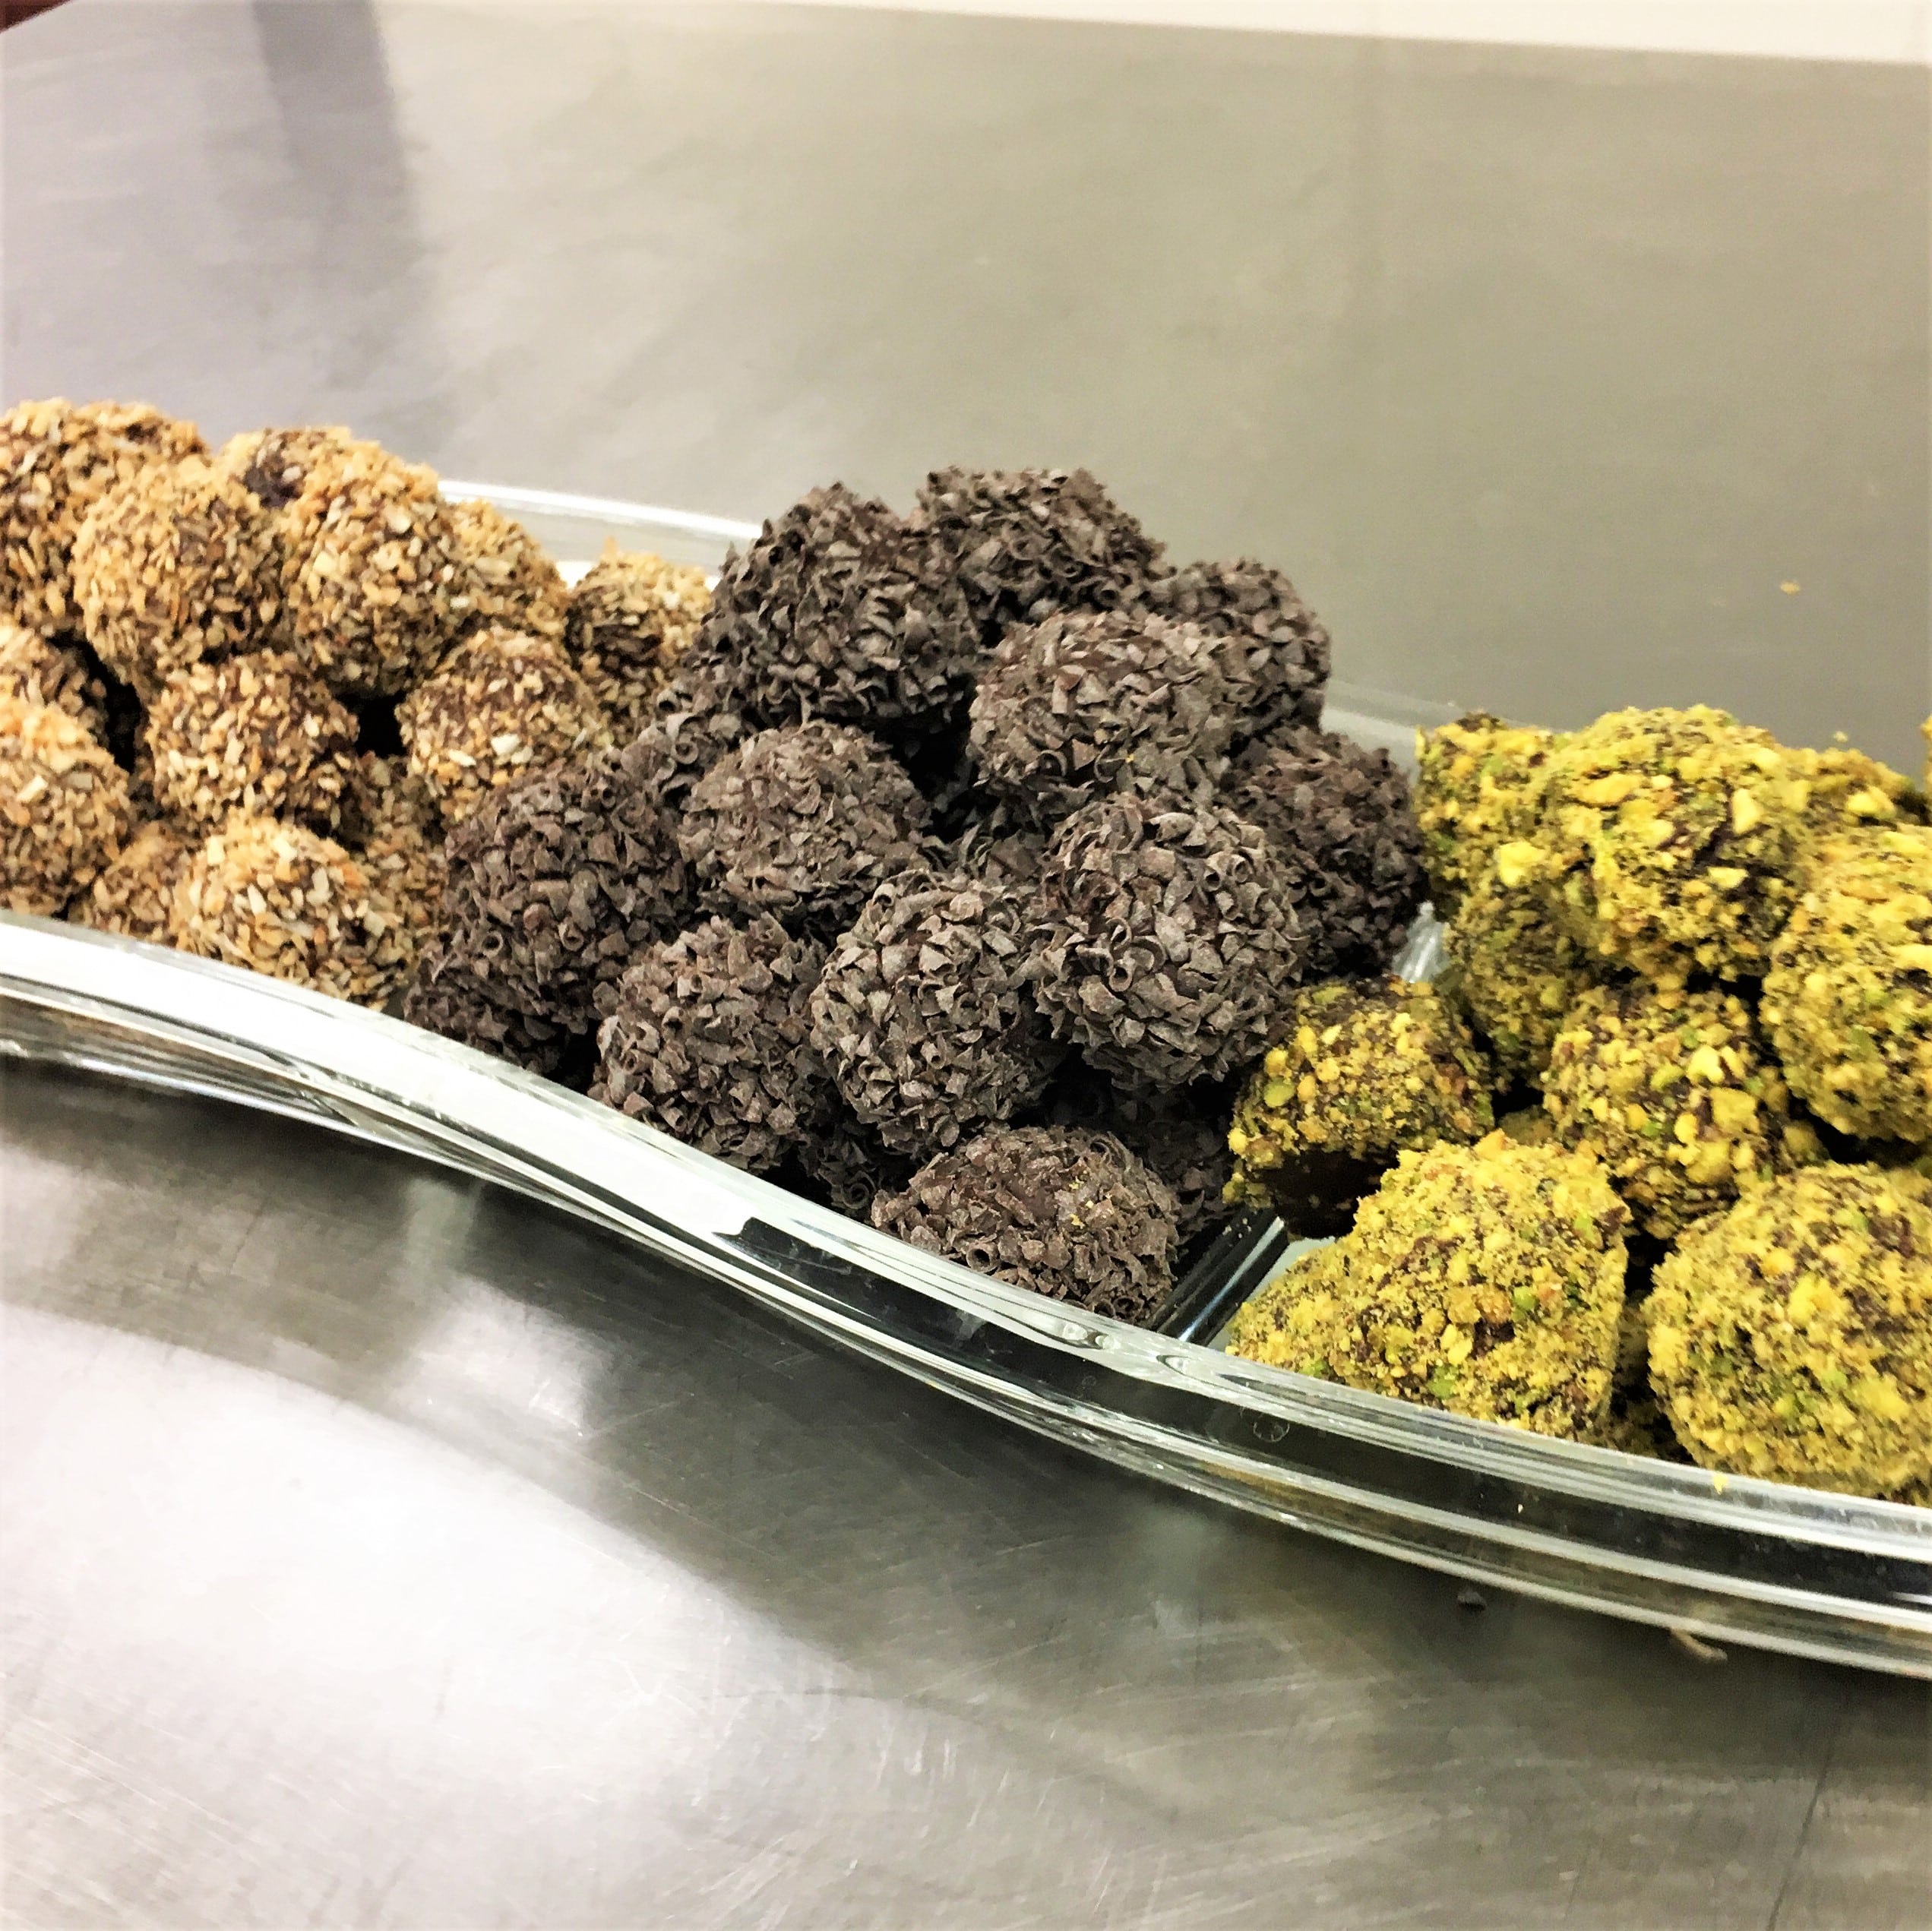 Did You Know? Today is National Truffle Day!